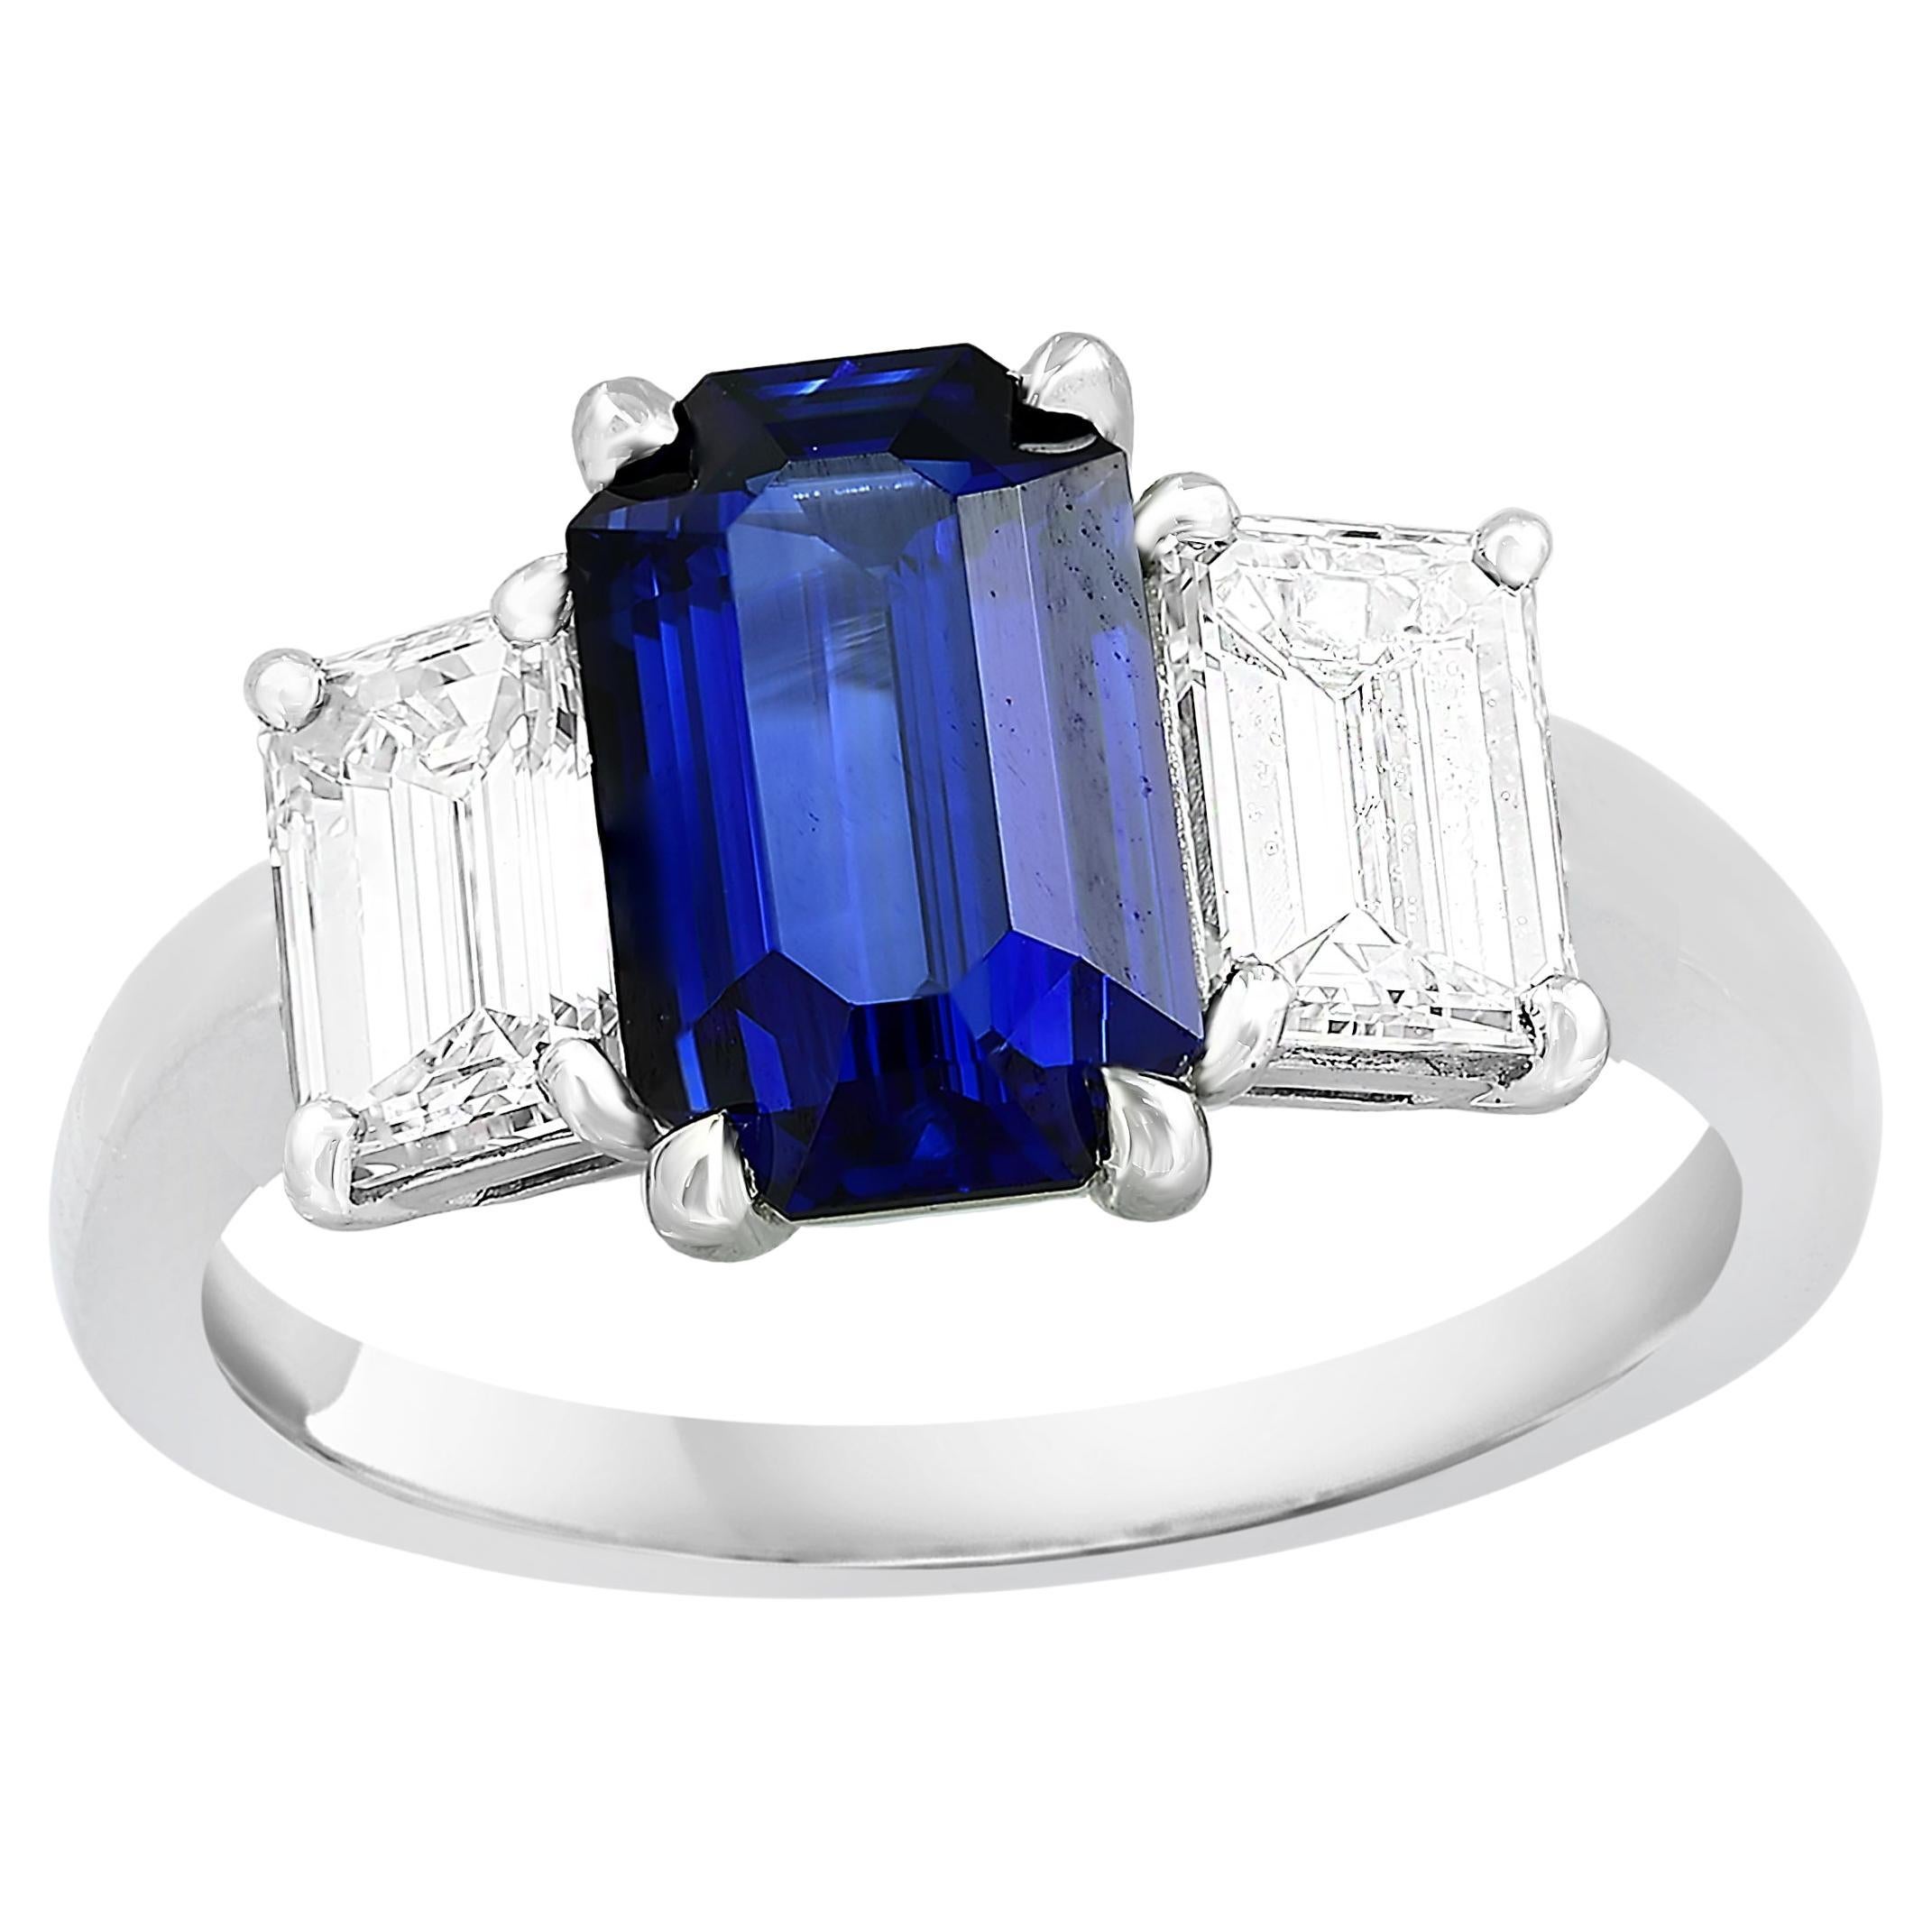 Certified 2.05 Carat Emerald Cut Sapphire & Diamond Engagement Ring in Platinum For Sale